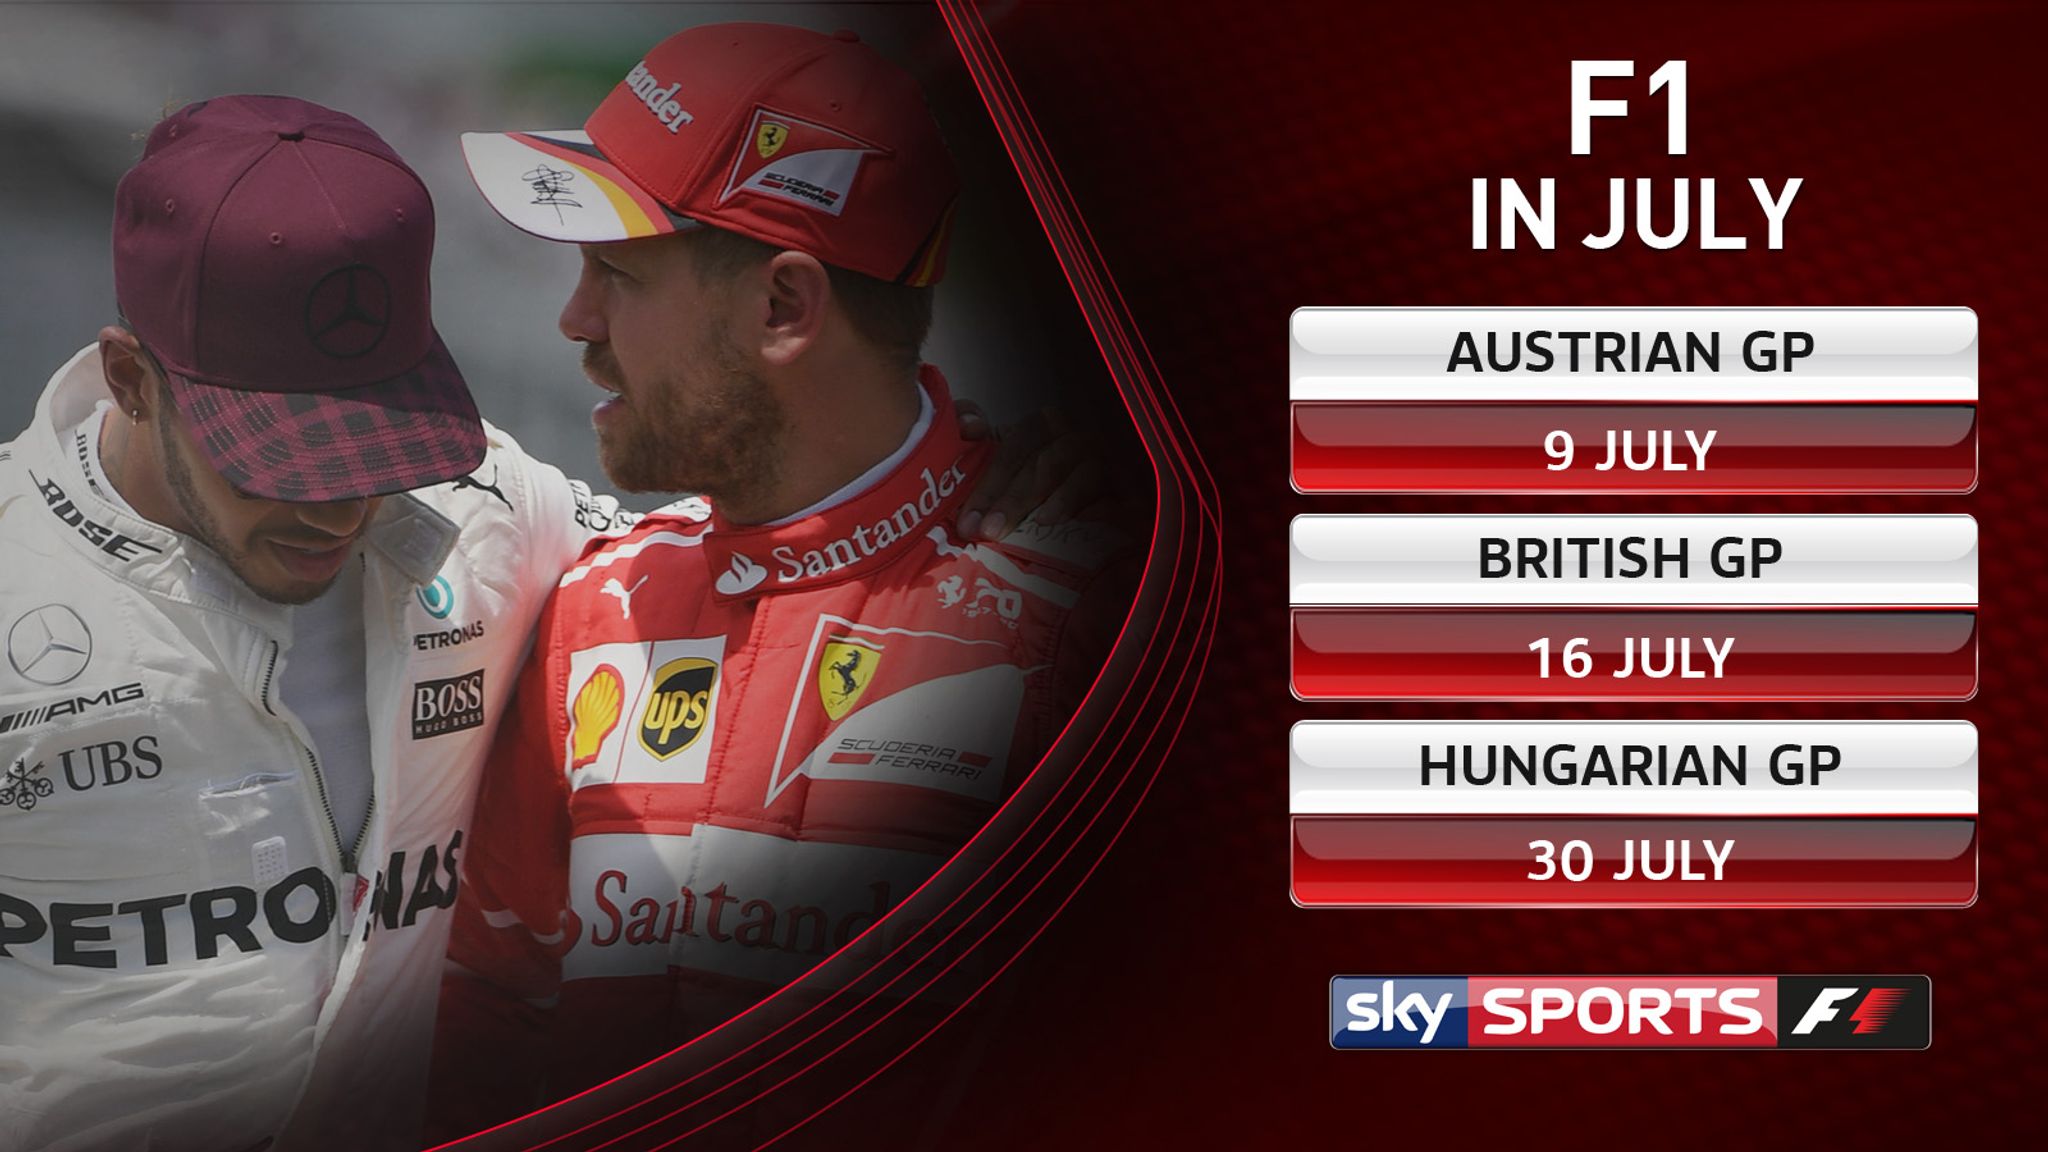 Watch the Austrian, British and Hungarian GPs live on Sky Sports F1 with a NOW TV month pass F1 News